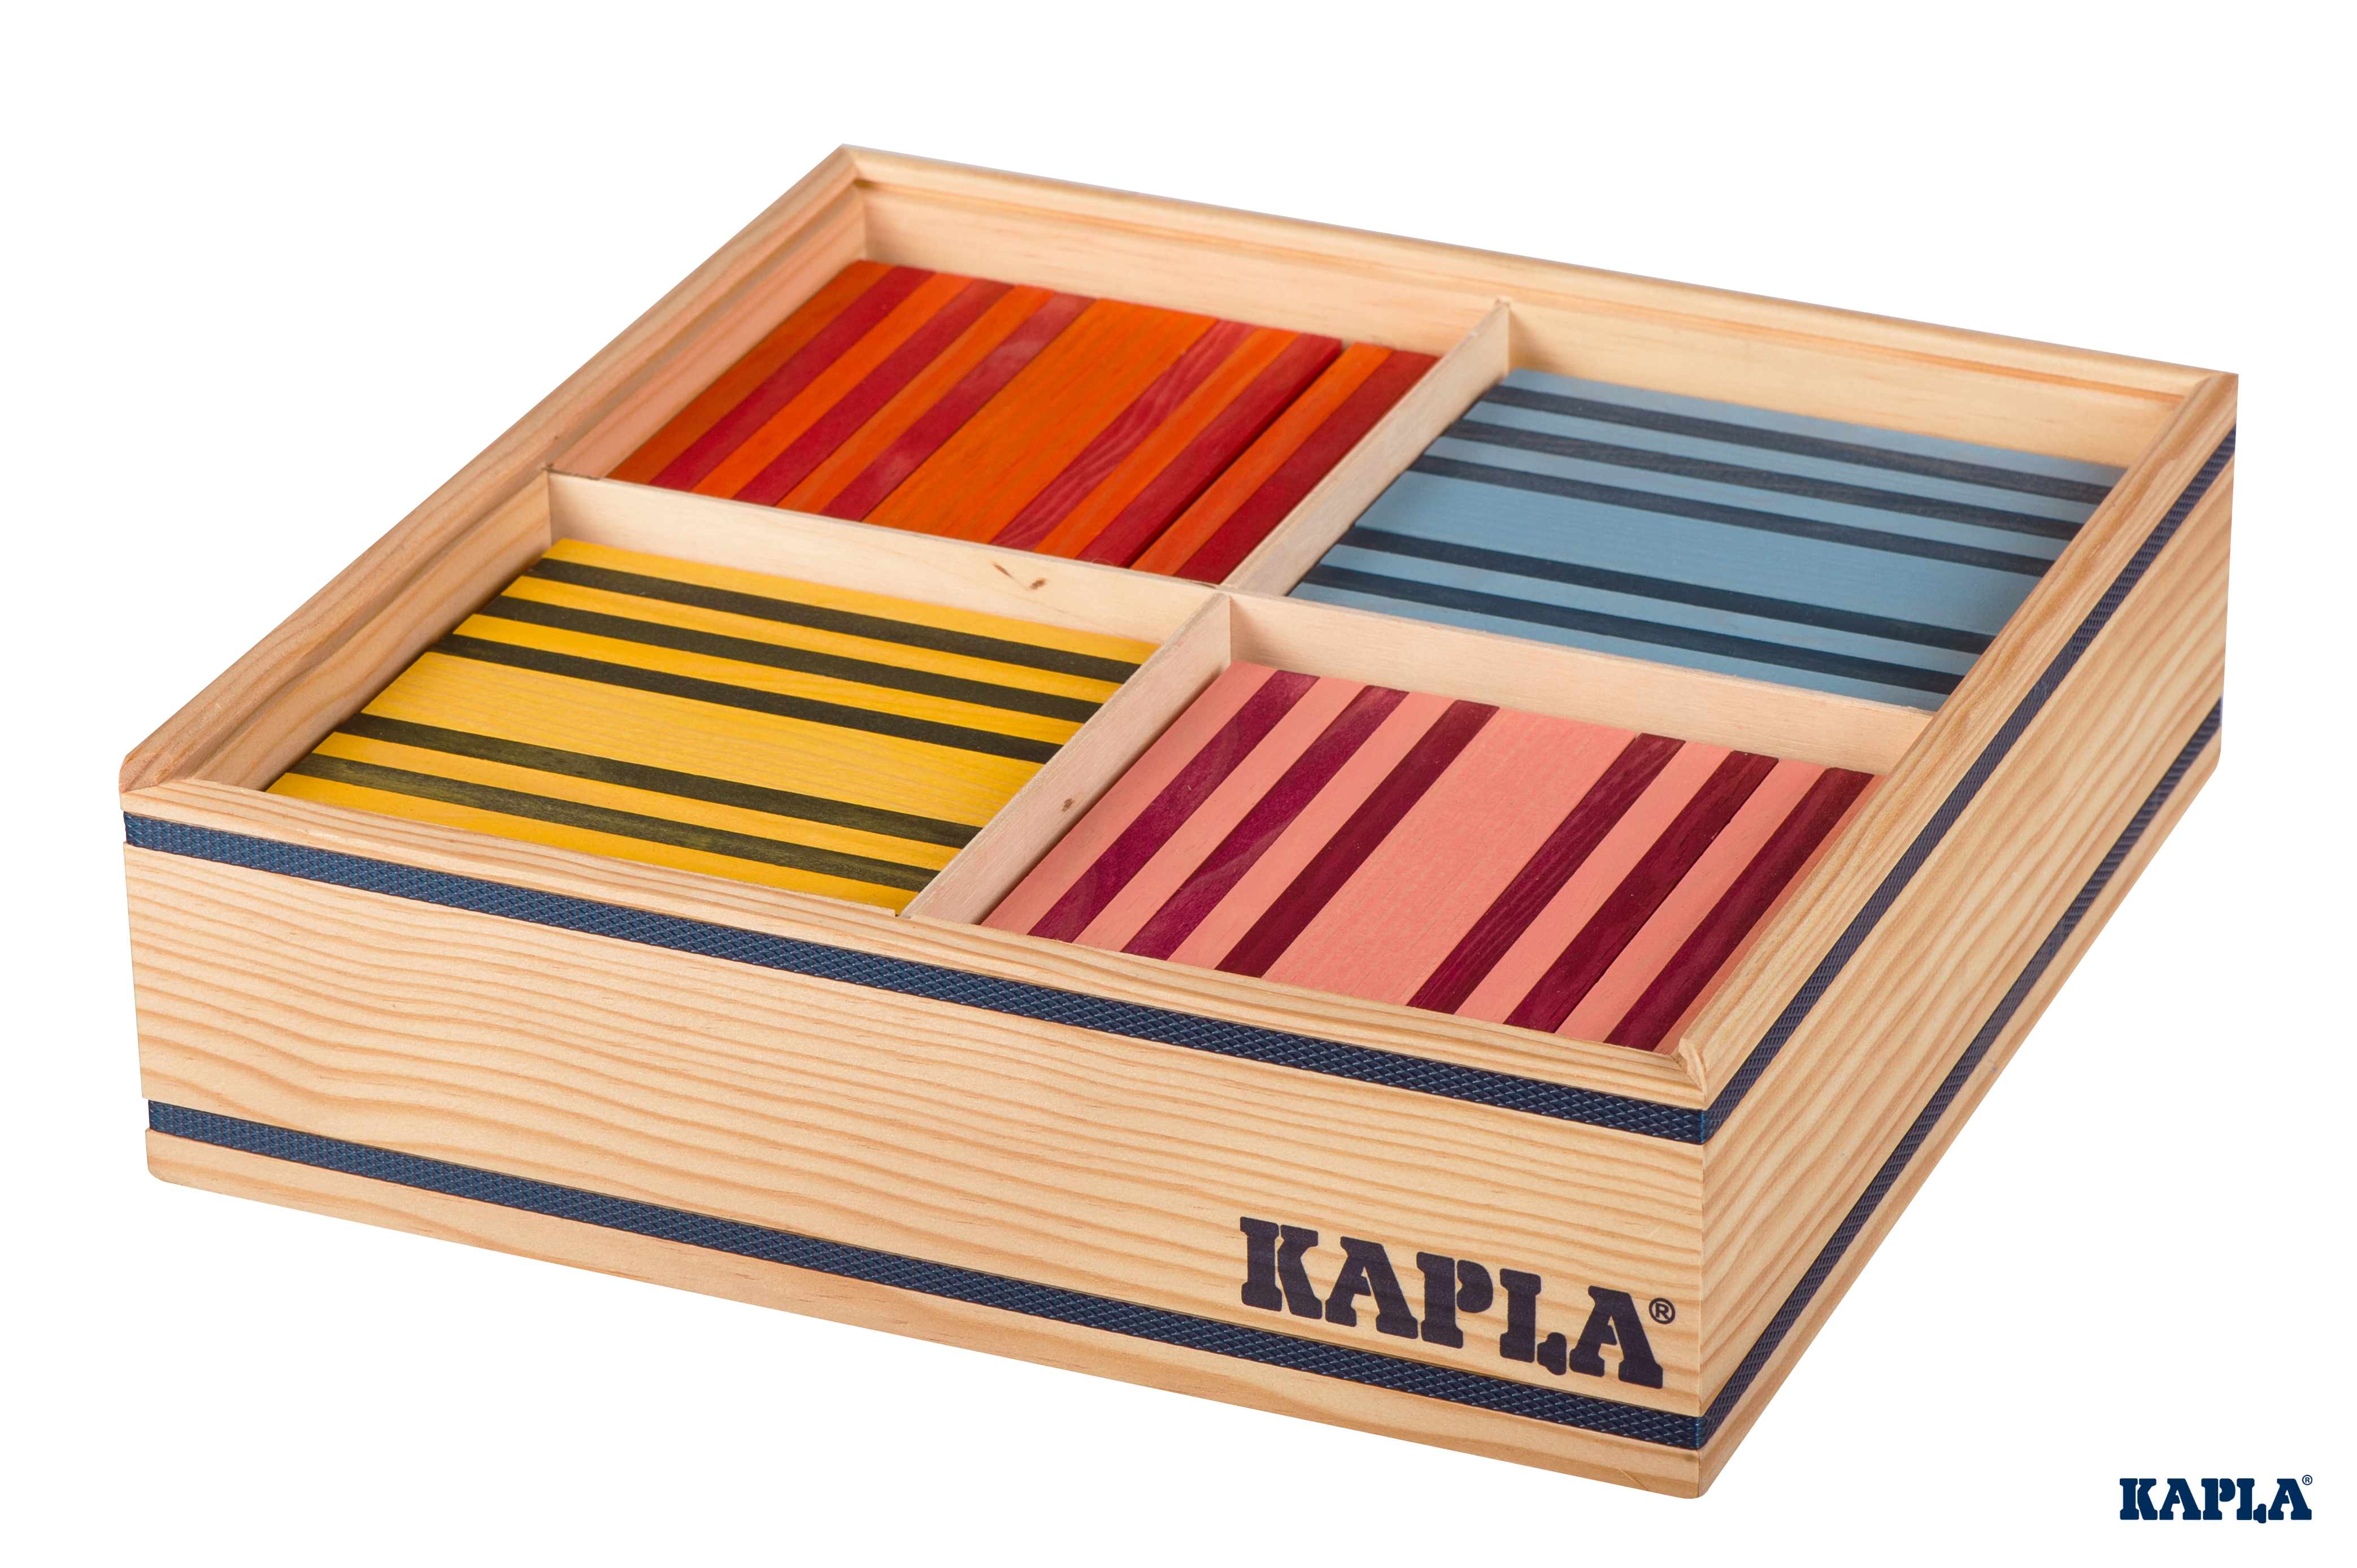 Kapla Octocolour Box at Little Sprout